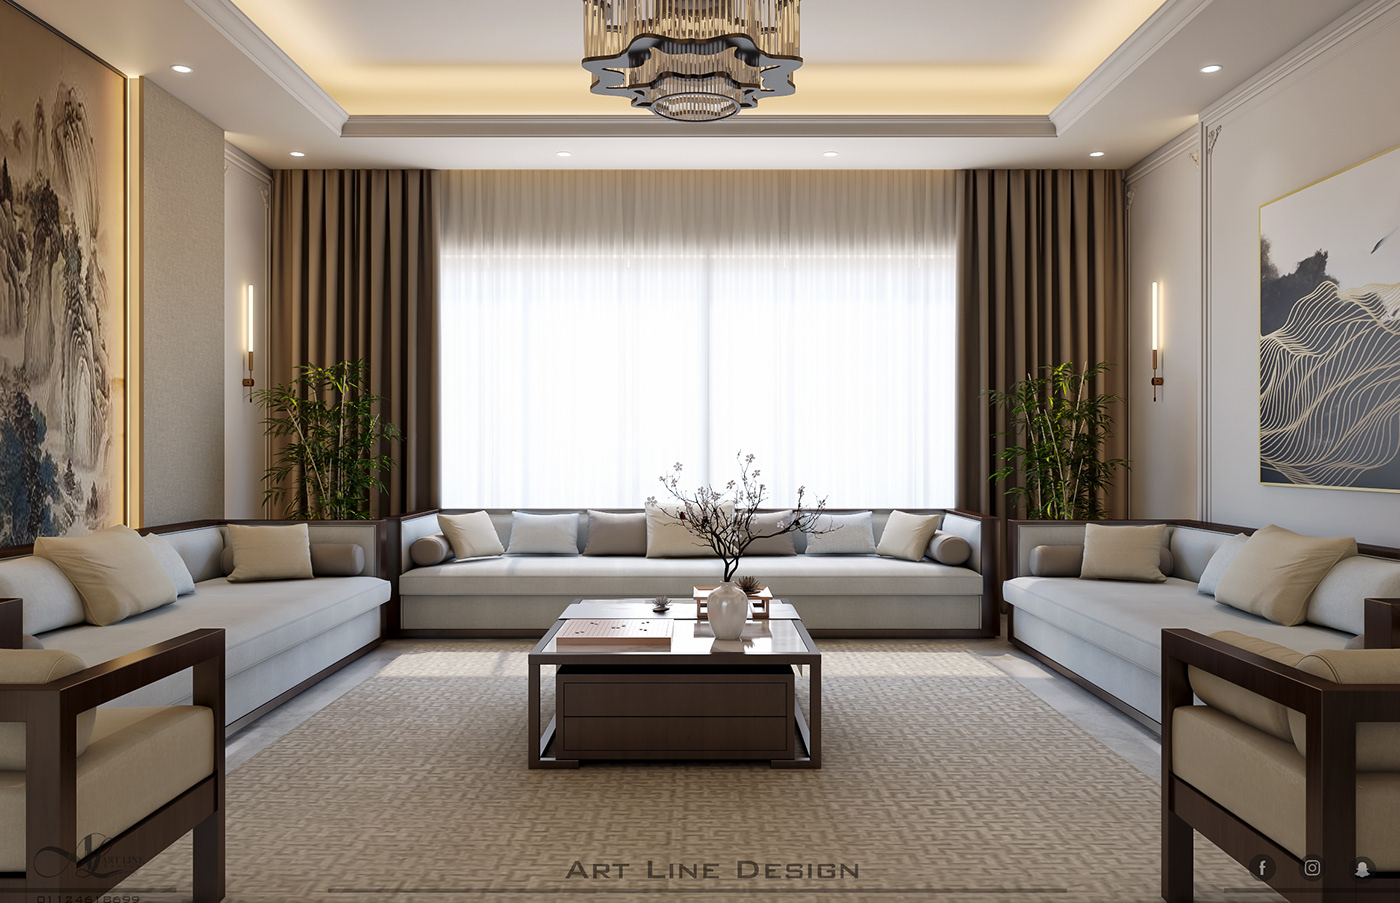 3D Visualization 3ds max architecture luxury Interior reception visualization Chinese style Chinese style design